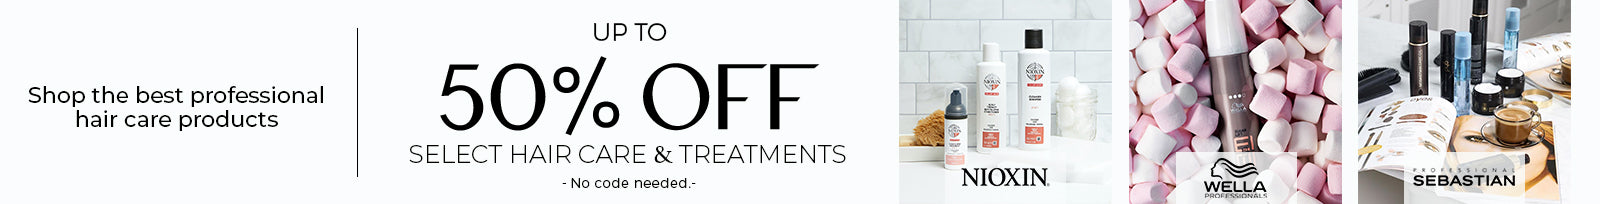 Up to 50% Off Select Hair Care & Treatment